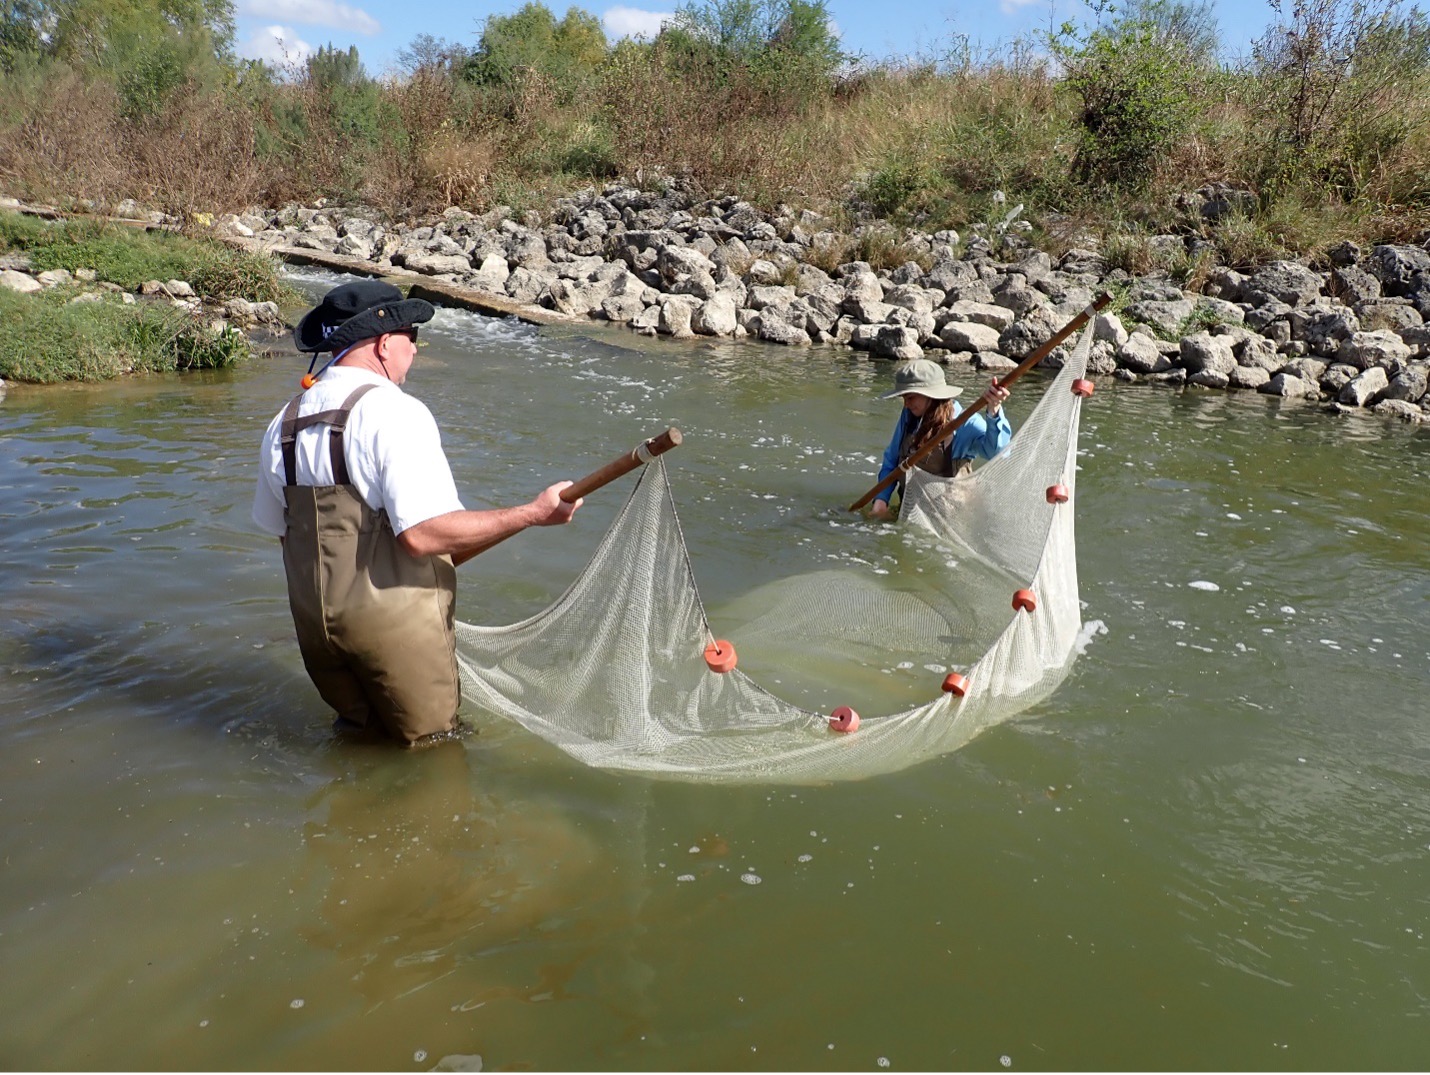 Two people in knee deep water hold partly submerged net to capture corral fish at the bottom of the river.